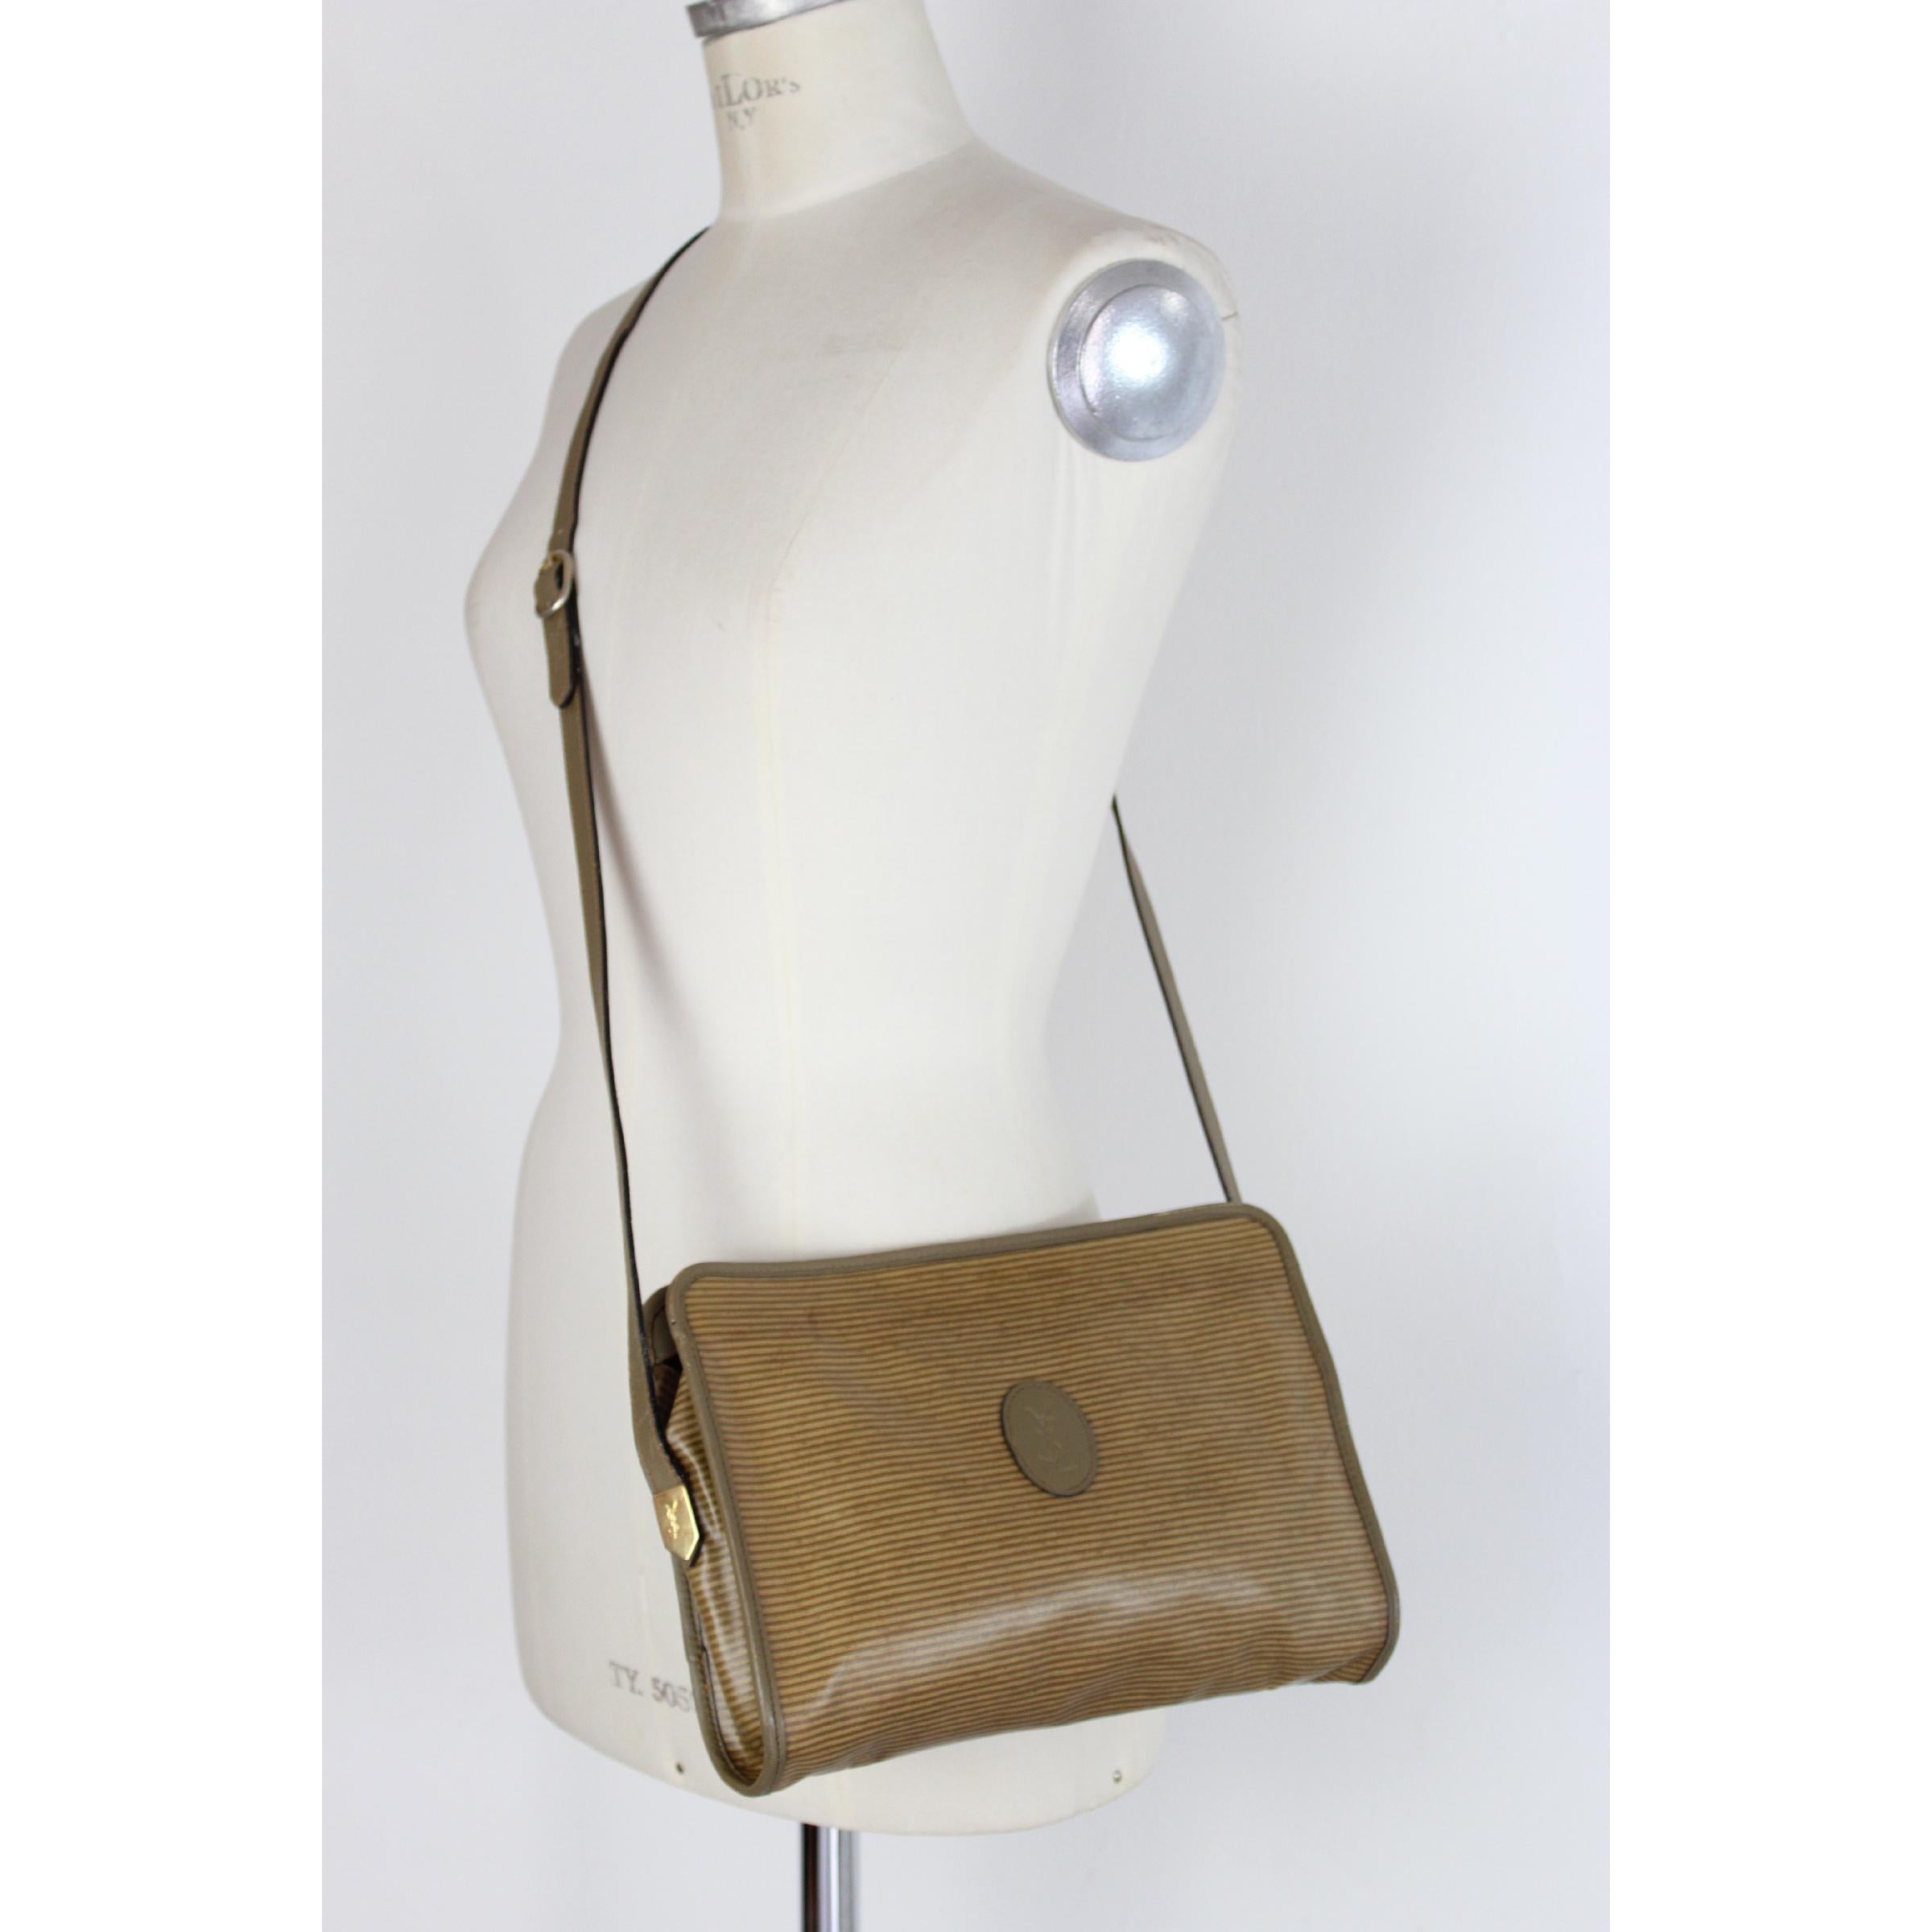 Vintage Yves Saint Laurent shoulder bag, beige in canvas and leather. Gold-colored details. Zip closure, internal dividers. 80s. Made in France. Good vintage condition, some small spots.

Width: 28 cm
Height: 20 cm
Depth: 6 cm